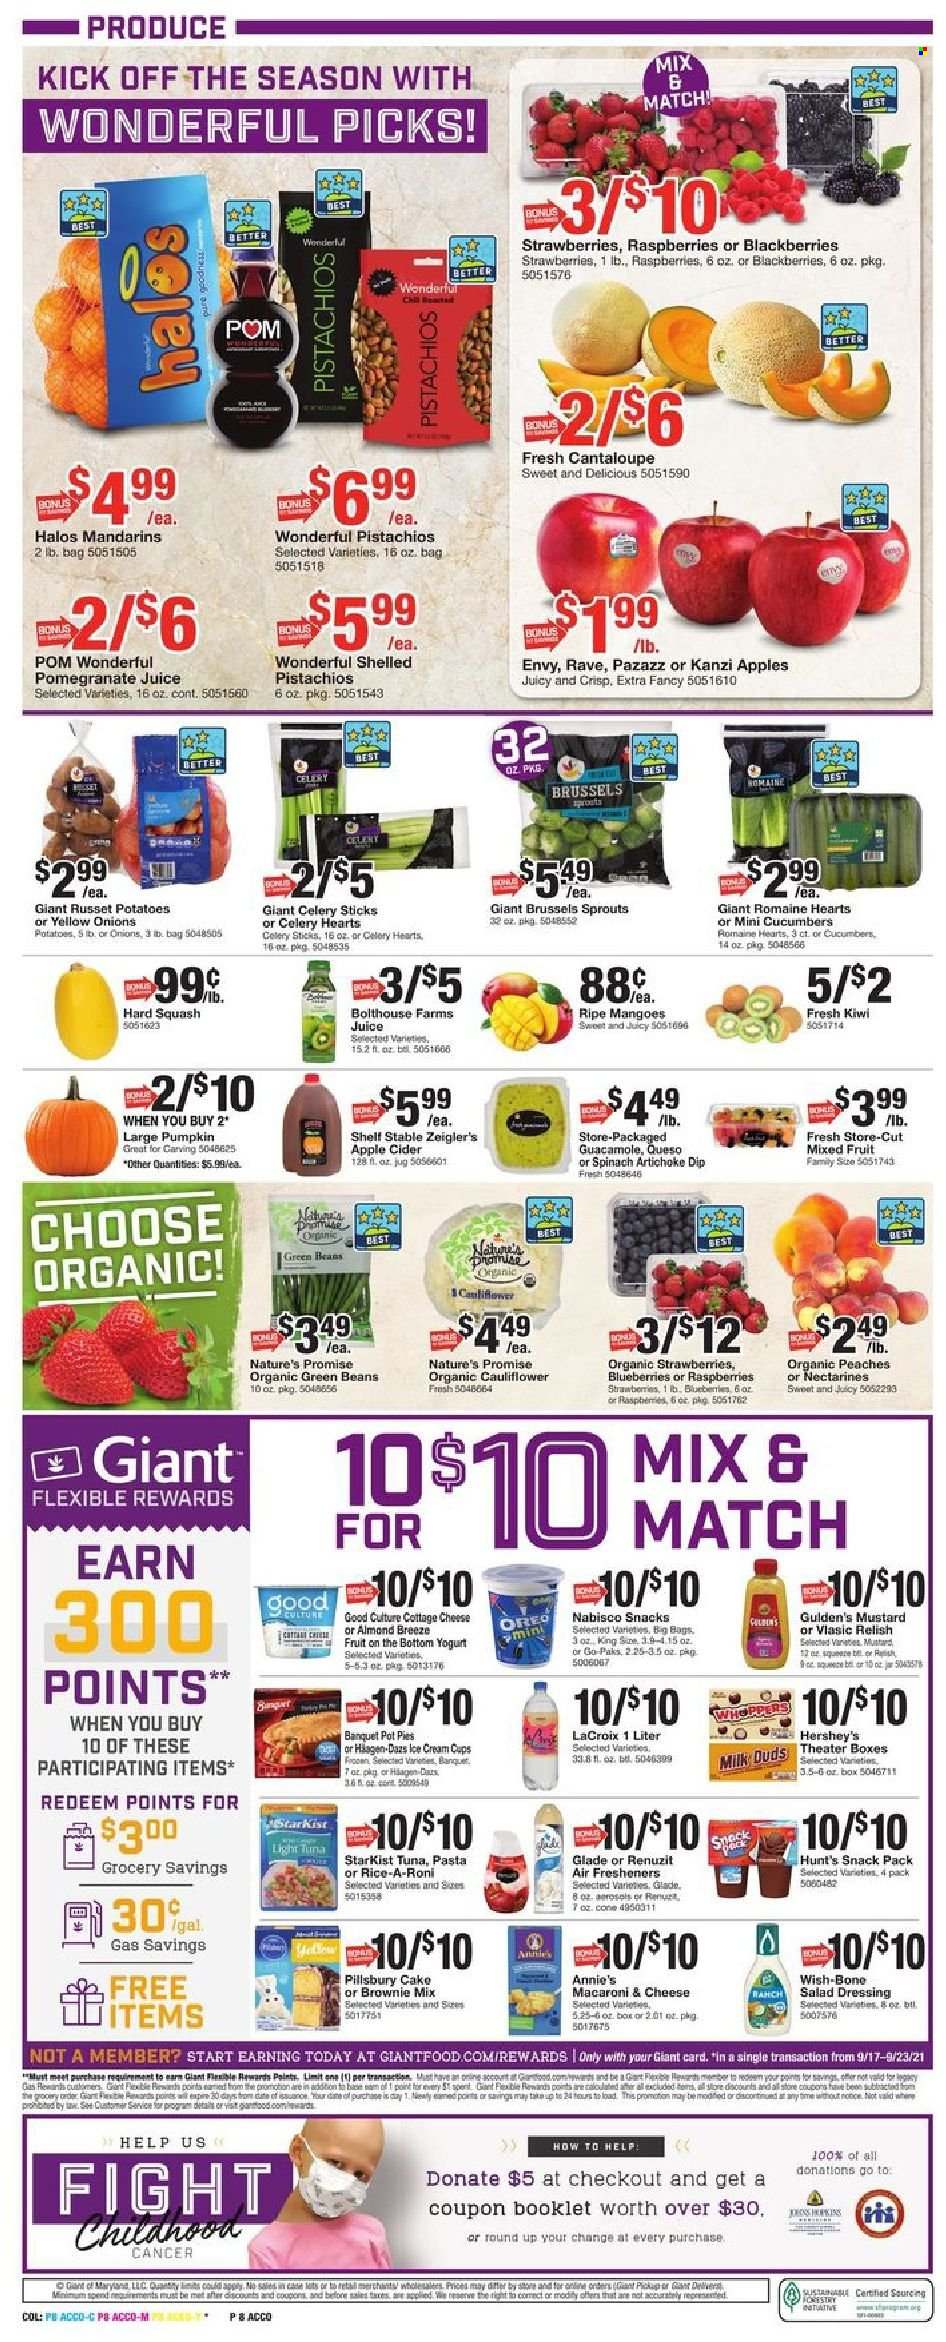 thumbnail - Giant Food Flyer - 09/17/2021 - 09/23/2021 - Sales products - cake, Nature’s Promise, pot pie, brownie mix, beans, cantaloupe, green beans, russet potatoes, potatoes, pumpkin, brussel sprouts, sleeved celery, blackberries, blueberries, kiwi, mandarines, strawberries, StarKist, macaroni & cheese, Pillsbury, Annie's, guacamole, cottage cheese, Oreo, yoghurt, dip, Hershey's, Milk Duds, celery sticks, light tuna, rice, mustard, salad dressing, dressing, pistachios, juice, tea, apple cider, cider, cup, jar, Renuzit, air freshener, Glade, nectarines, pomegranate, peaches. Page 8.